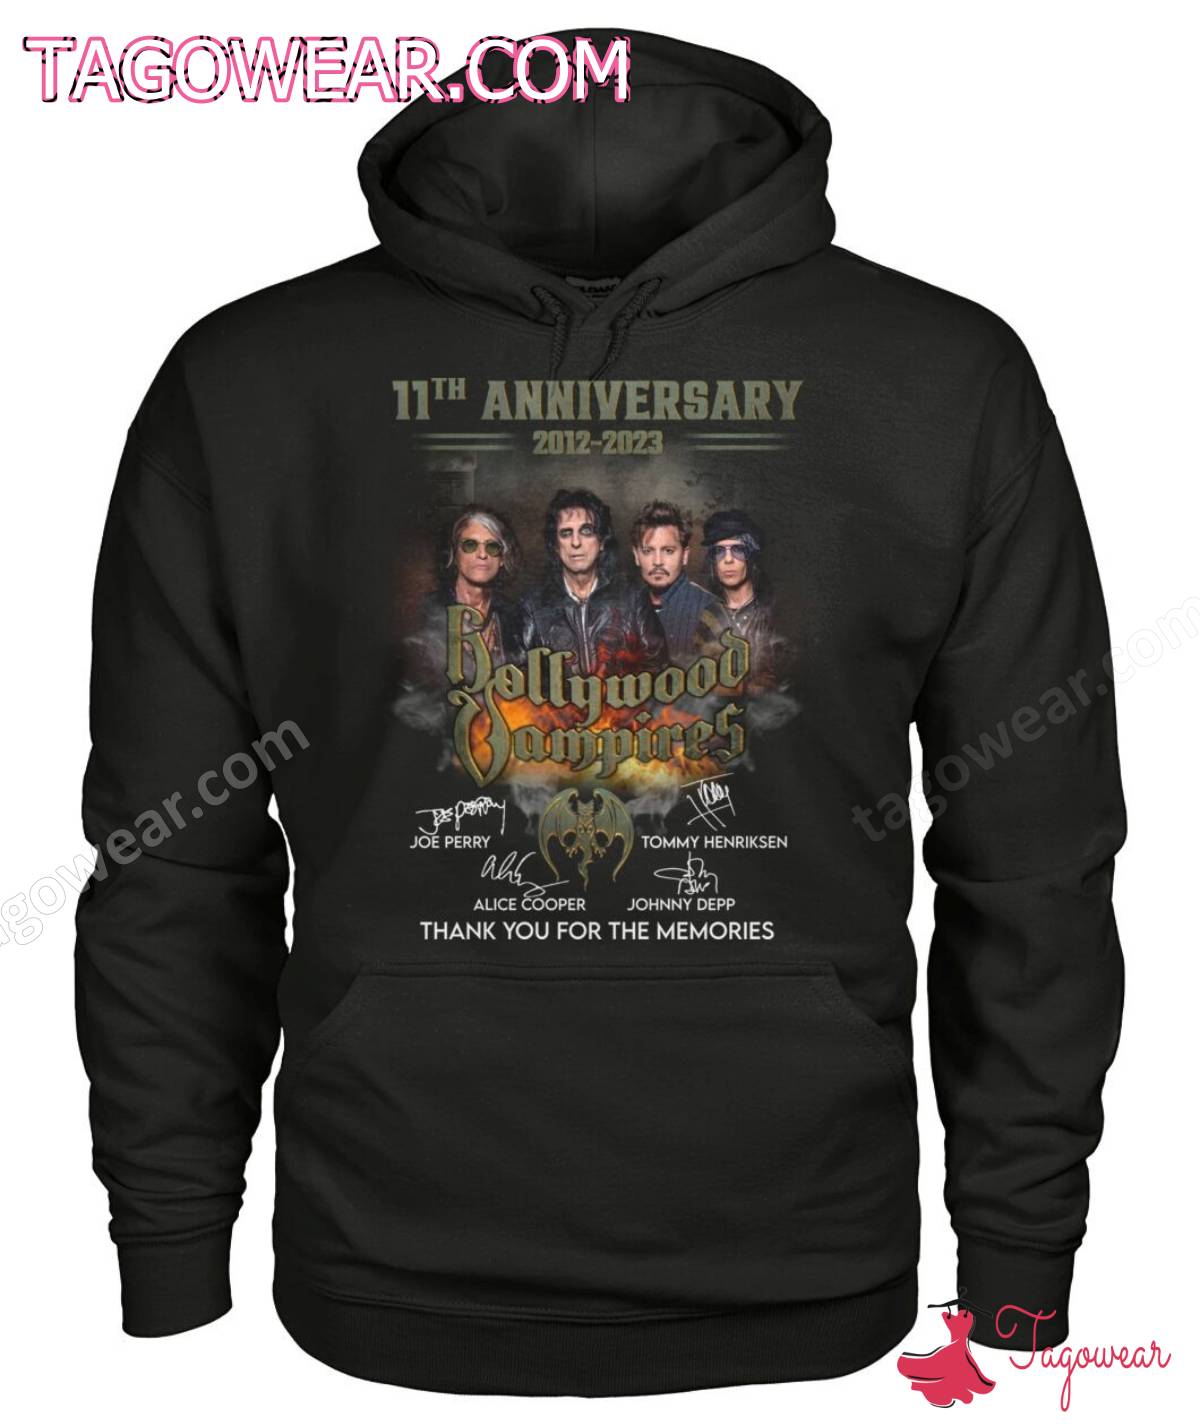 11th Anniversary 2012-2023 Hollywood Vampires Signatures Thank You For The Memories Shirt, Tank Top a